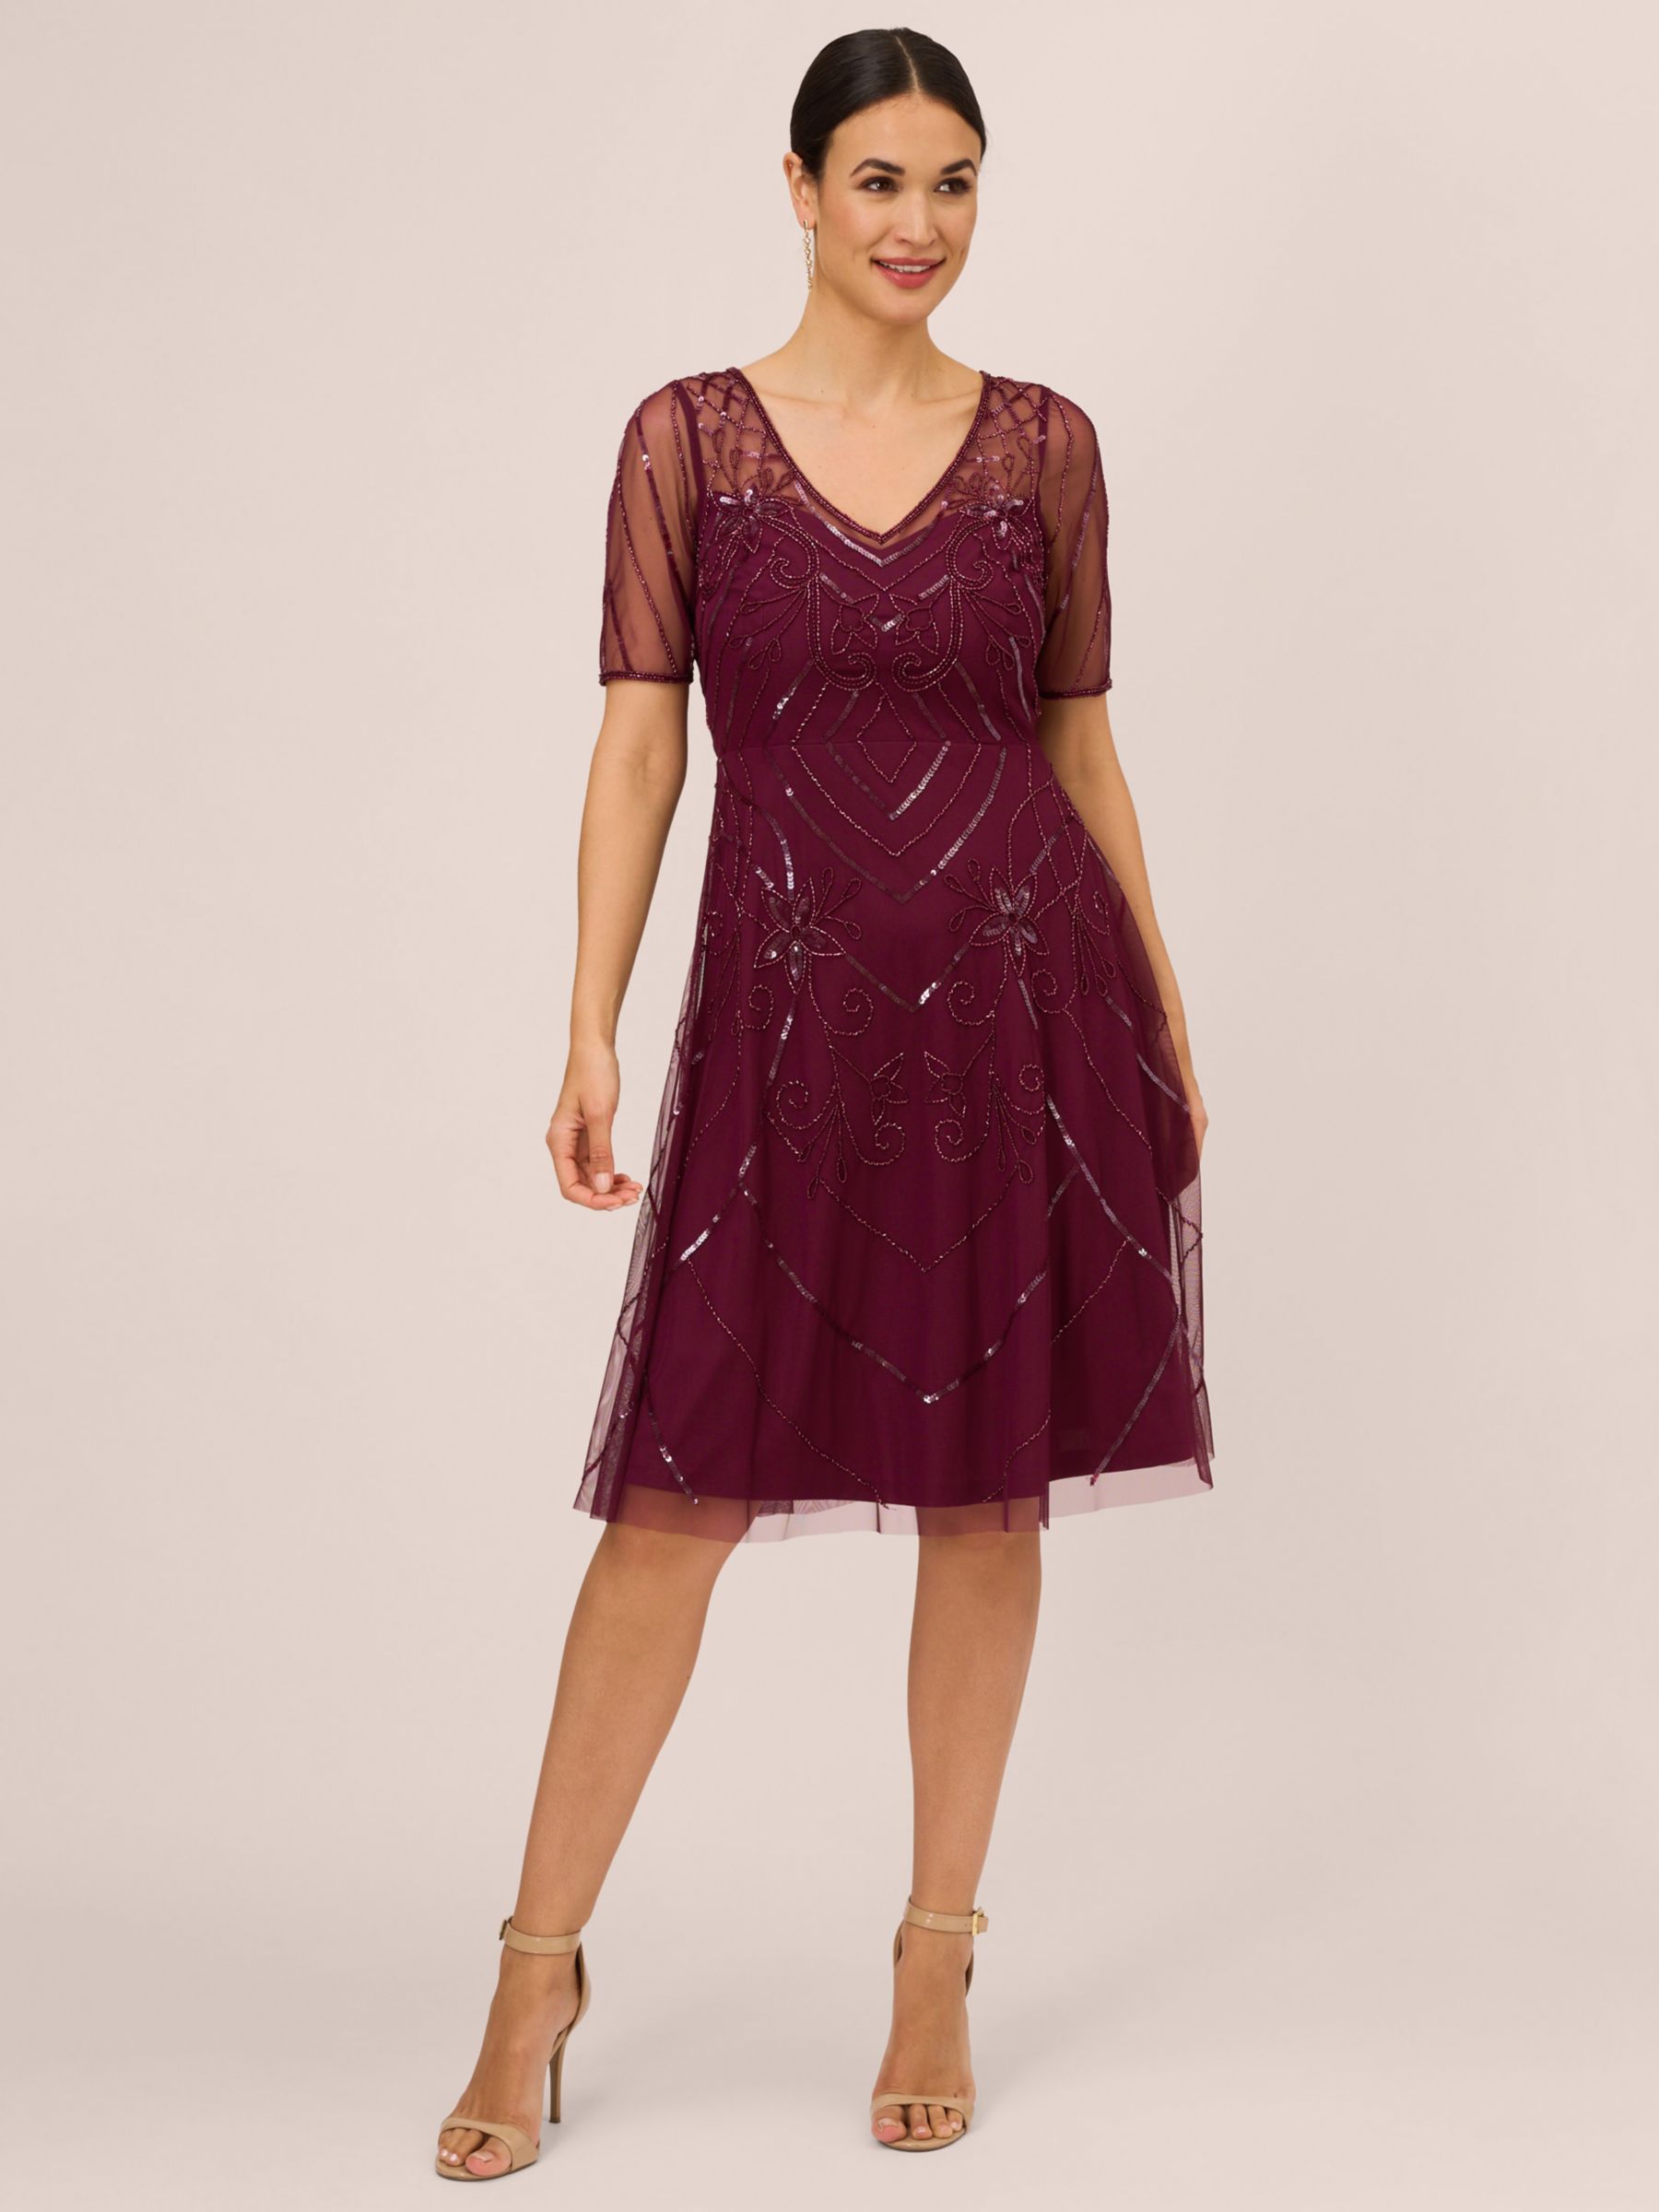 Adrianna Papell Papell Studio Beaded Dress, Cassis, 6